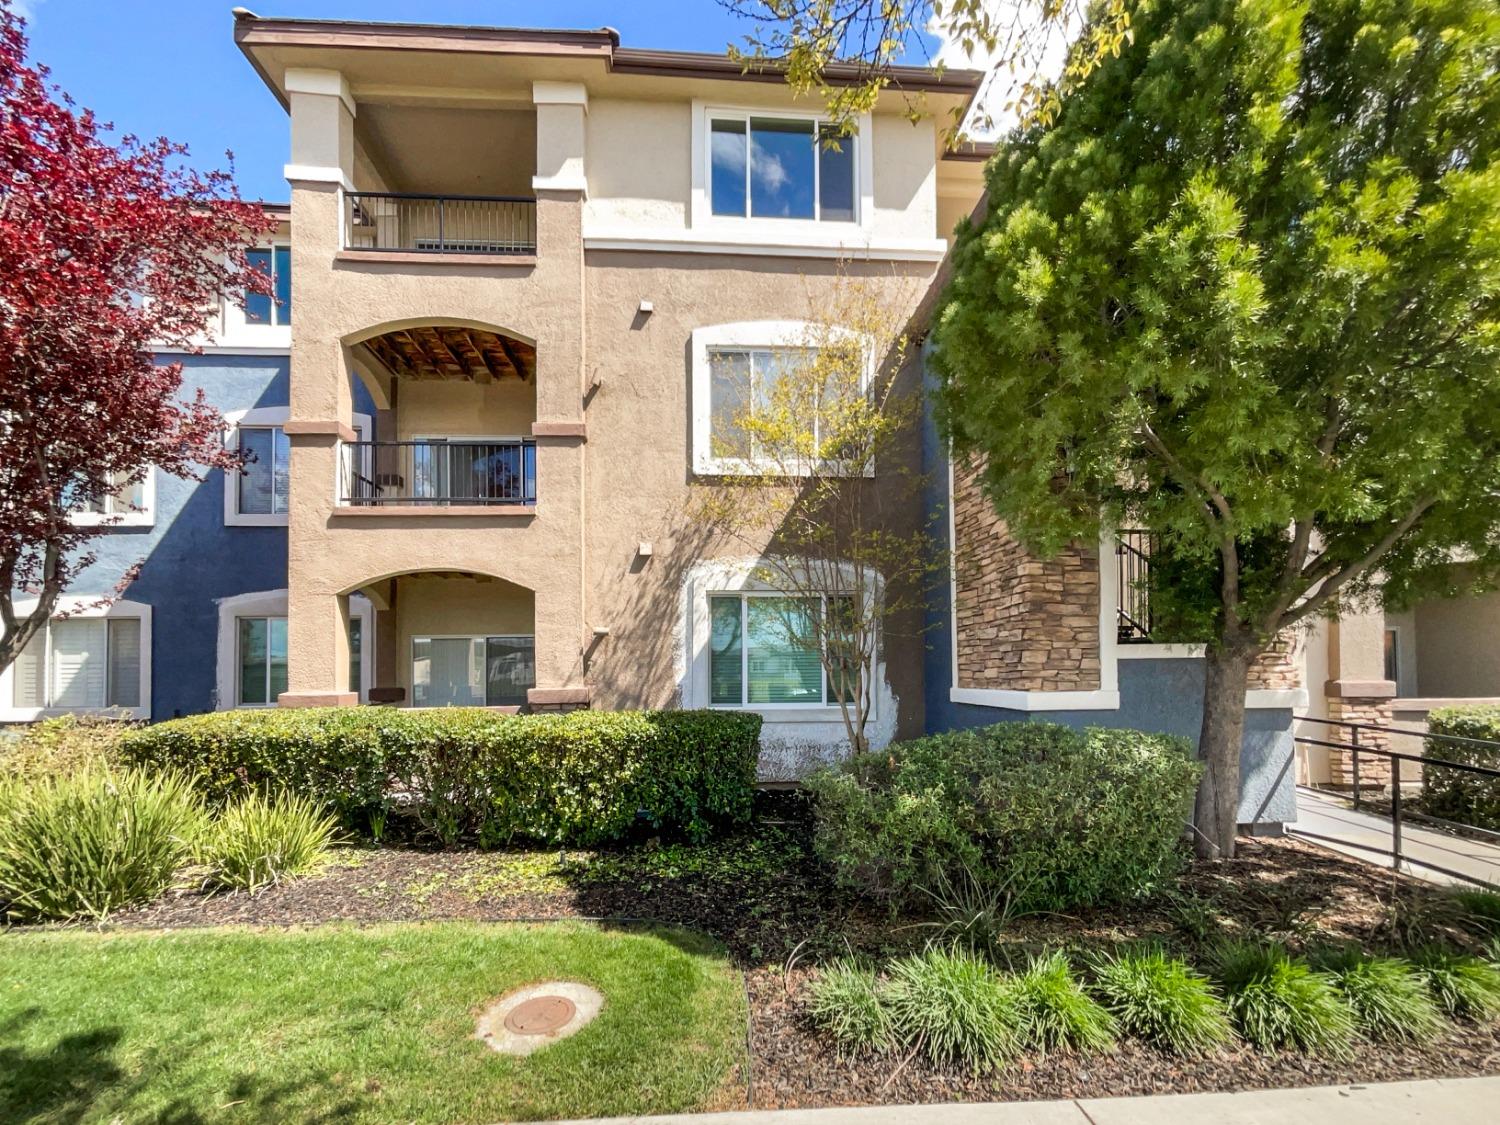 Photo of 701 Gibson Dr #1234 in Roseville, CA